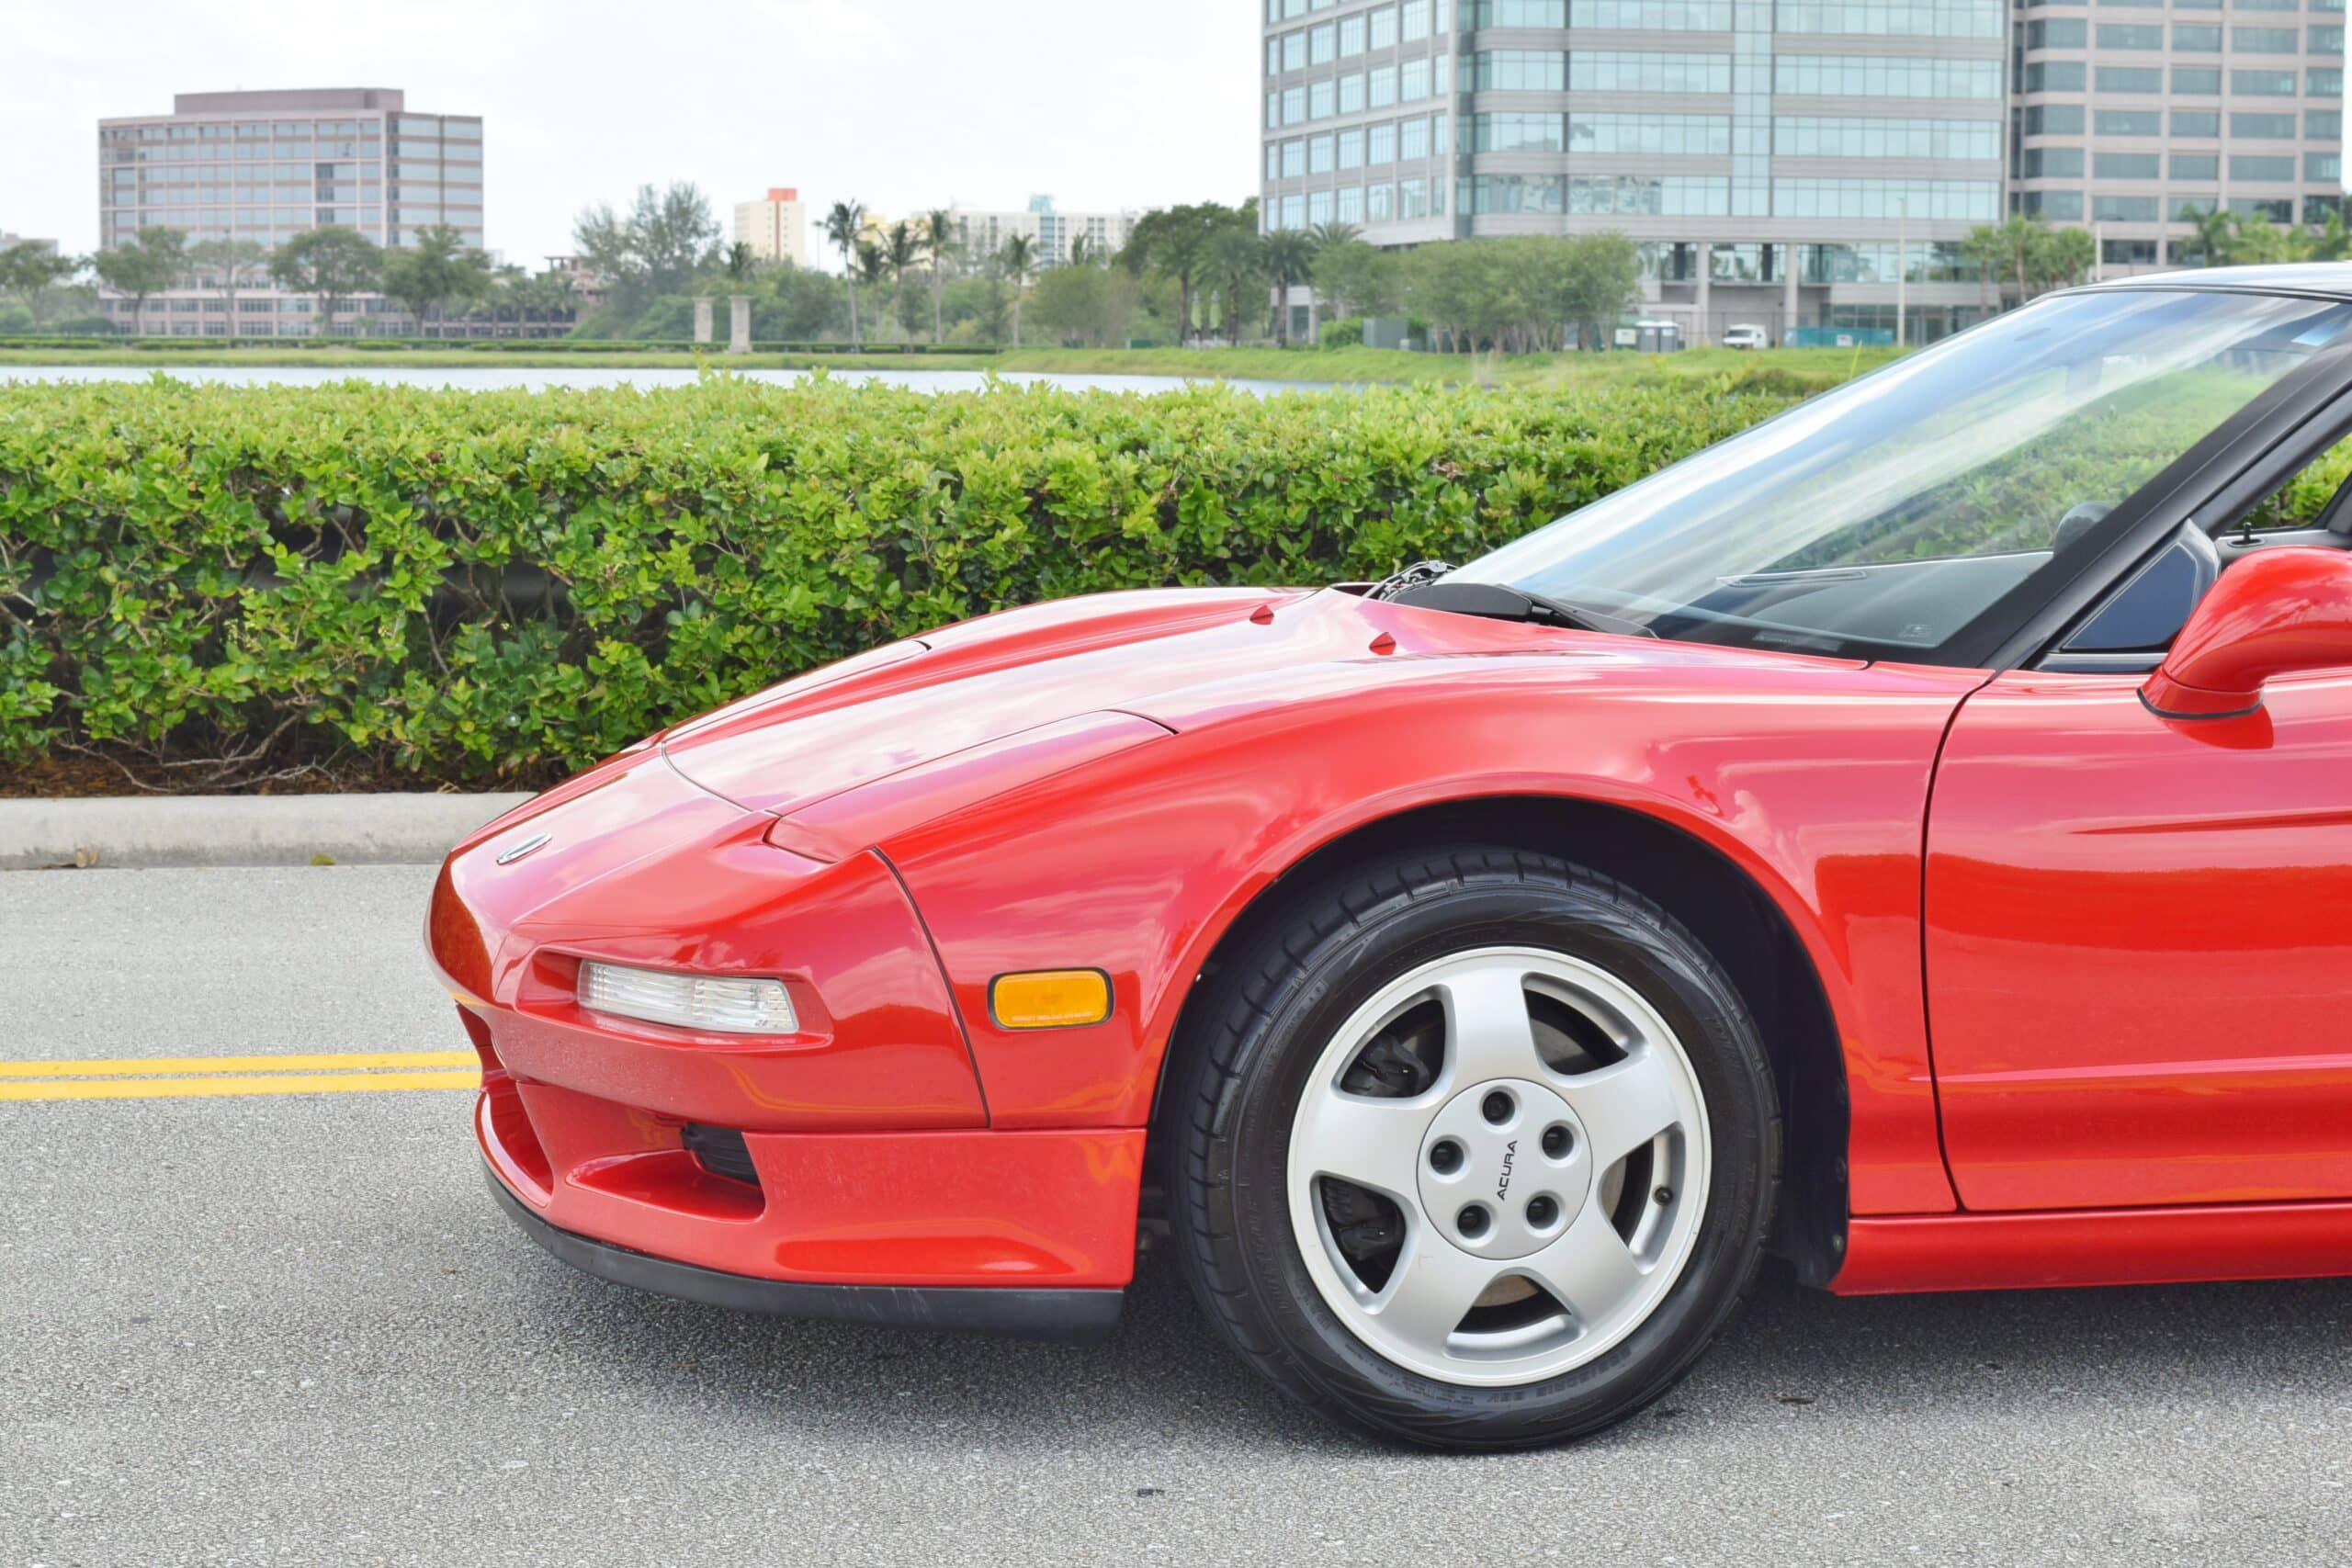 1991 Acura NSX 2 Owner-Florida Car -ONLY 20K Miles! – All original – Unmodified- Collector item